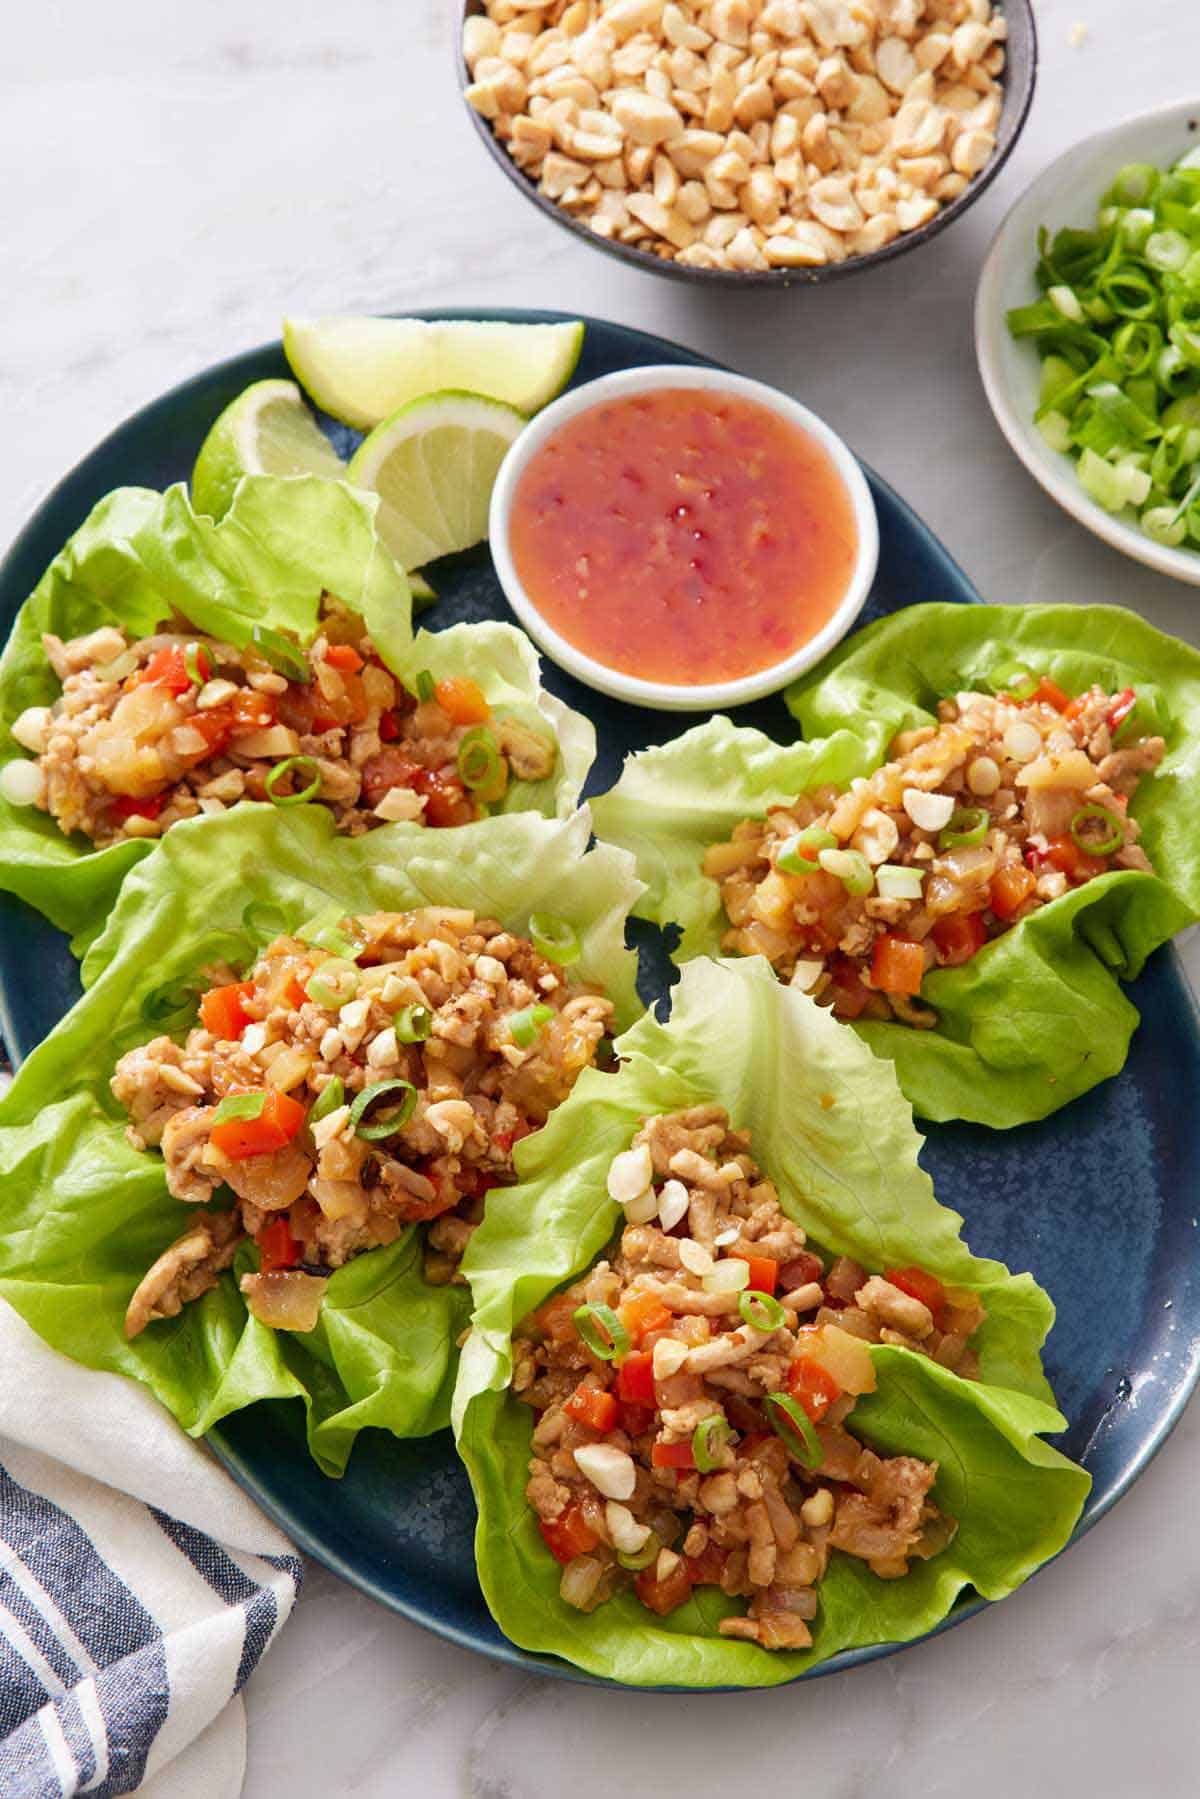 A platter of lettuce wraps with a sweet chili sauce in a bowl along with lime wedges. A bowl of peanuts and green onions off on the side.